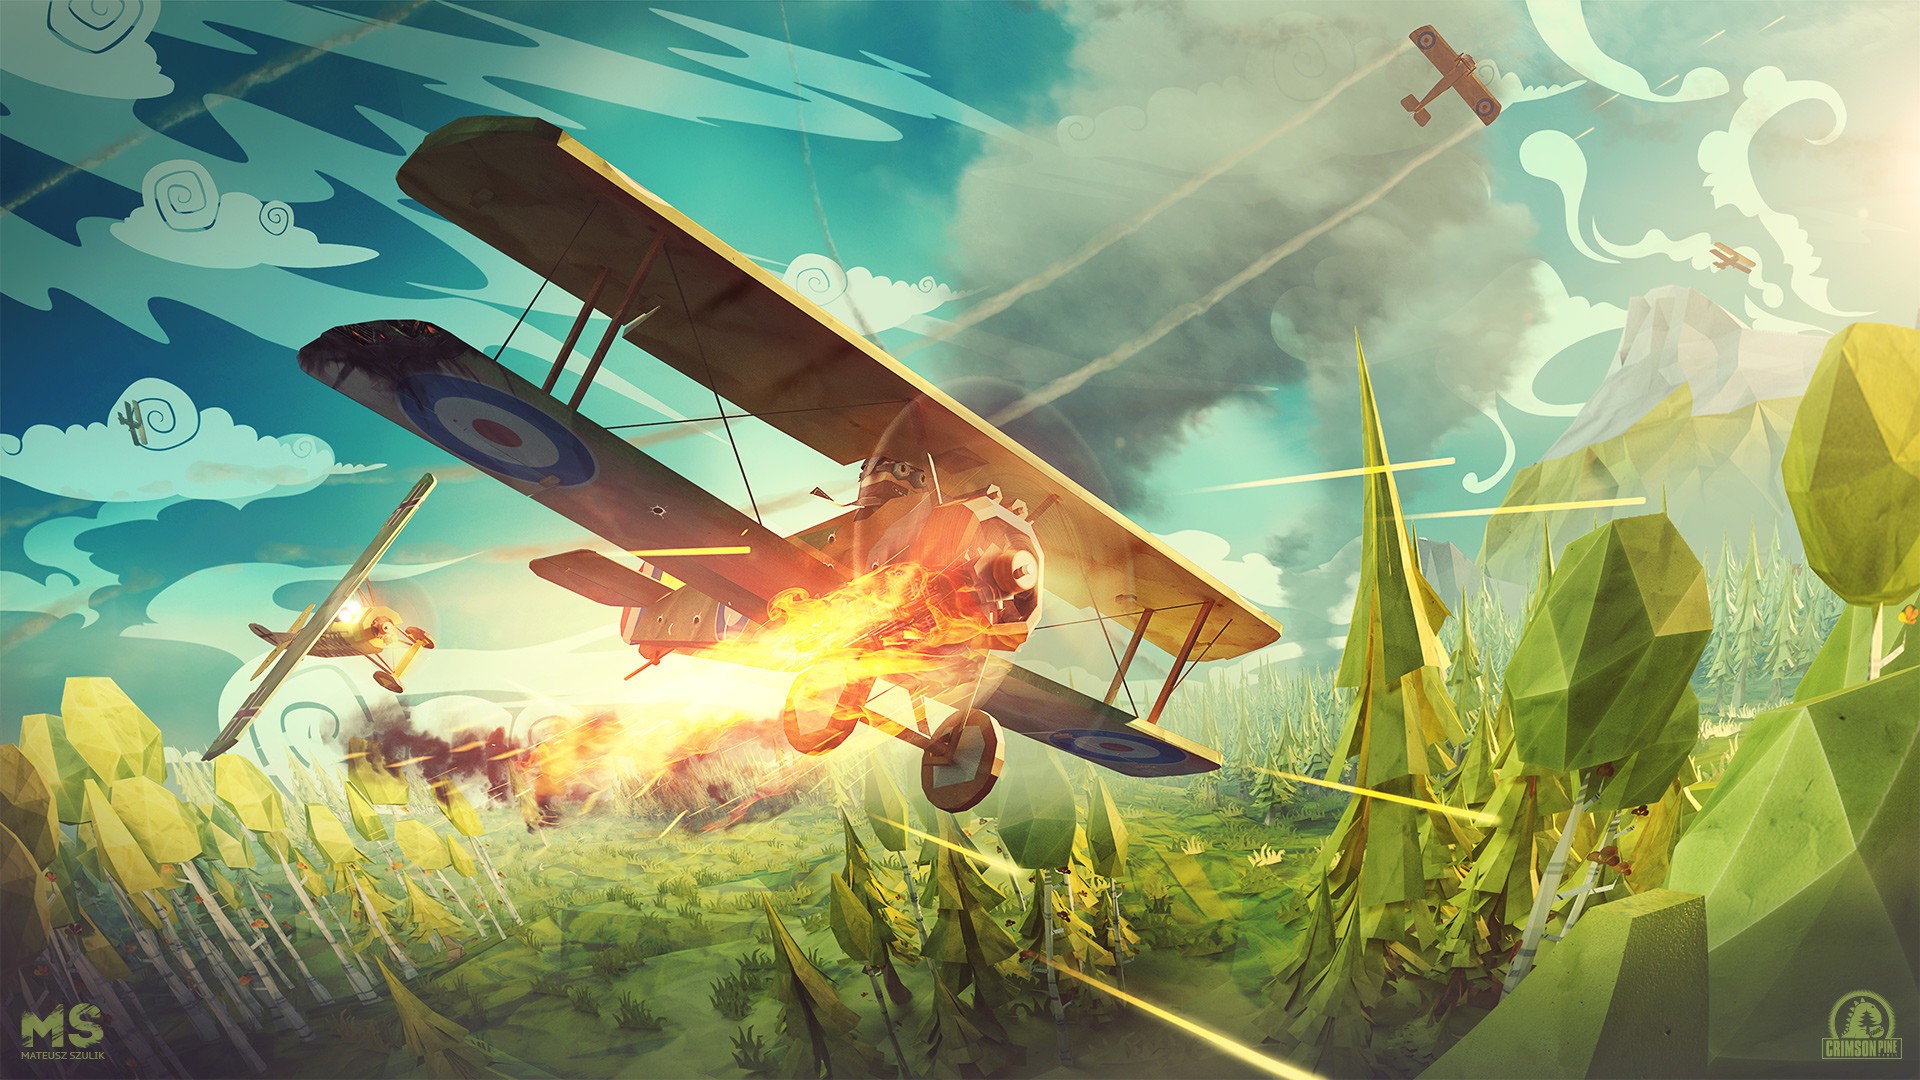 General 1920x1080 digital art low poly Mateusz Szulik clouds airplane battle fire trees forest flying smoke contrails biplane propeller Royal Air Force vehicle